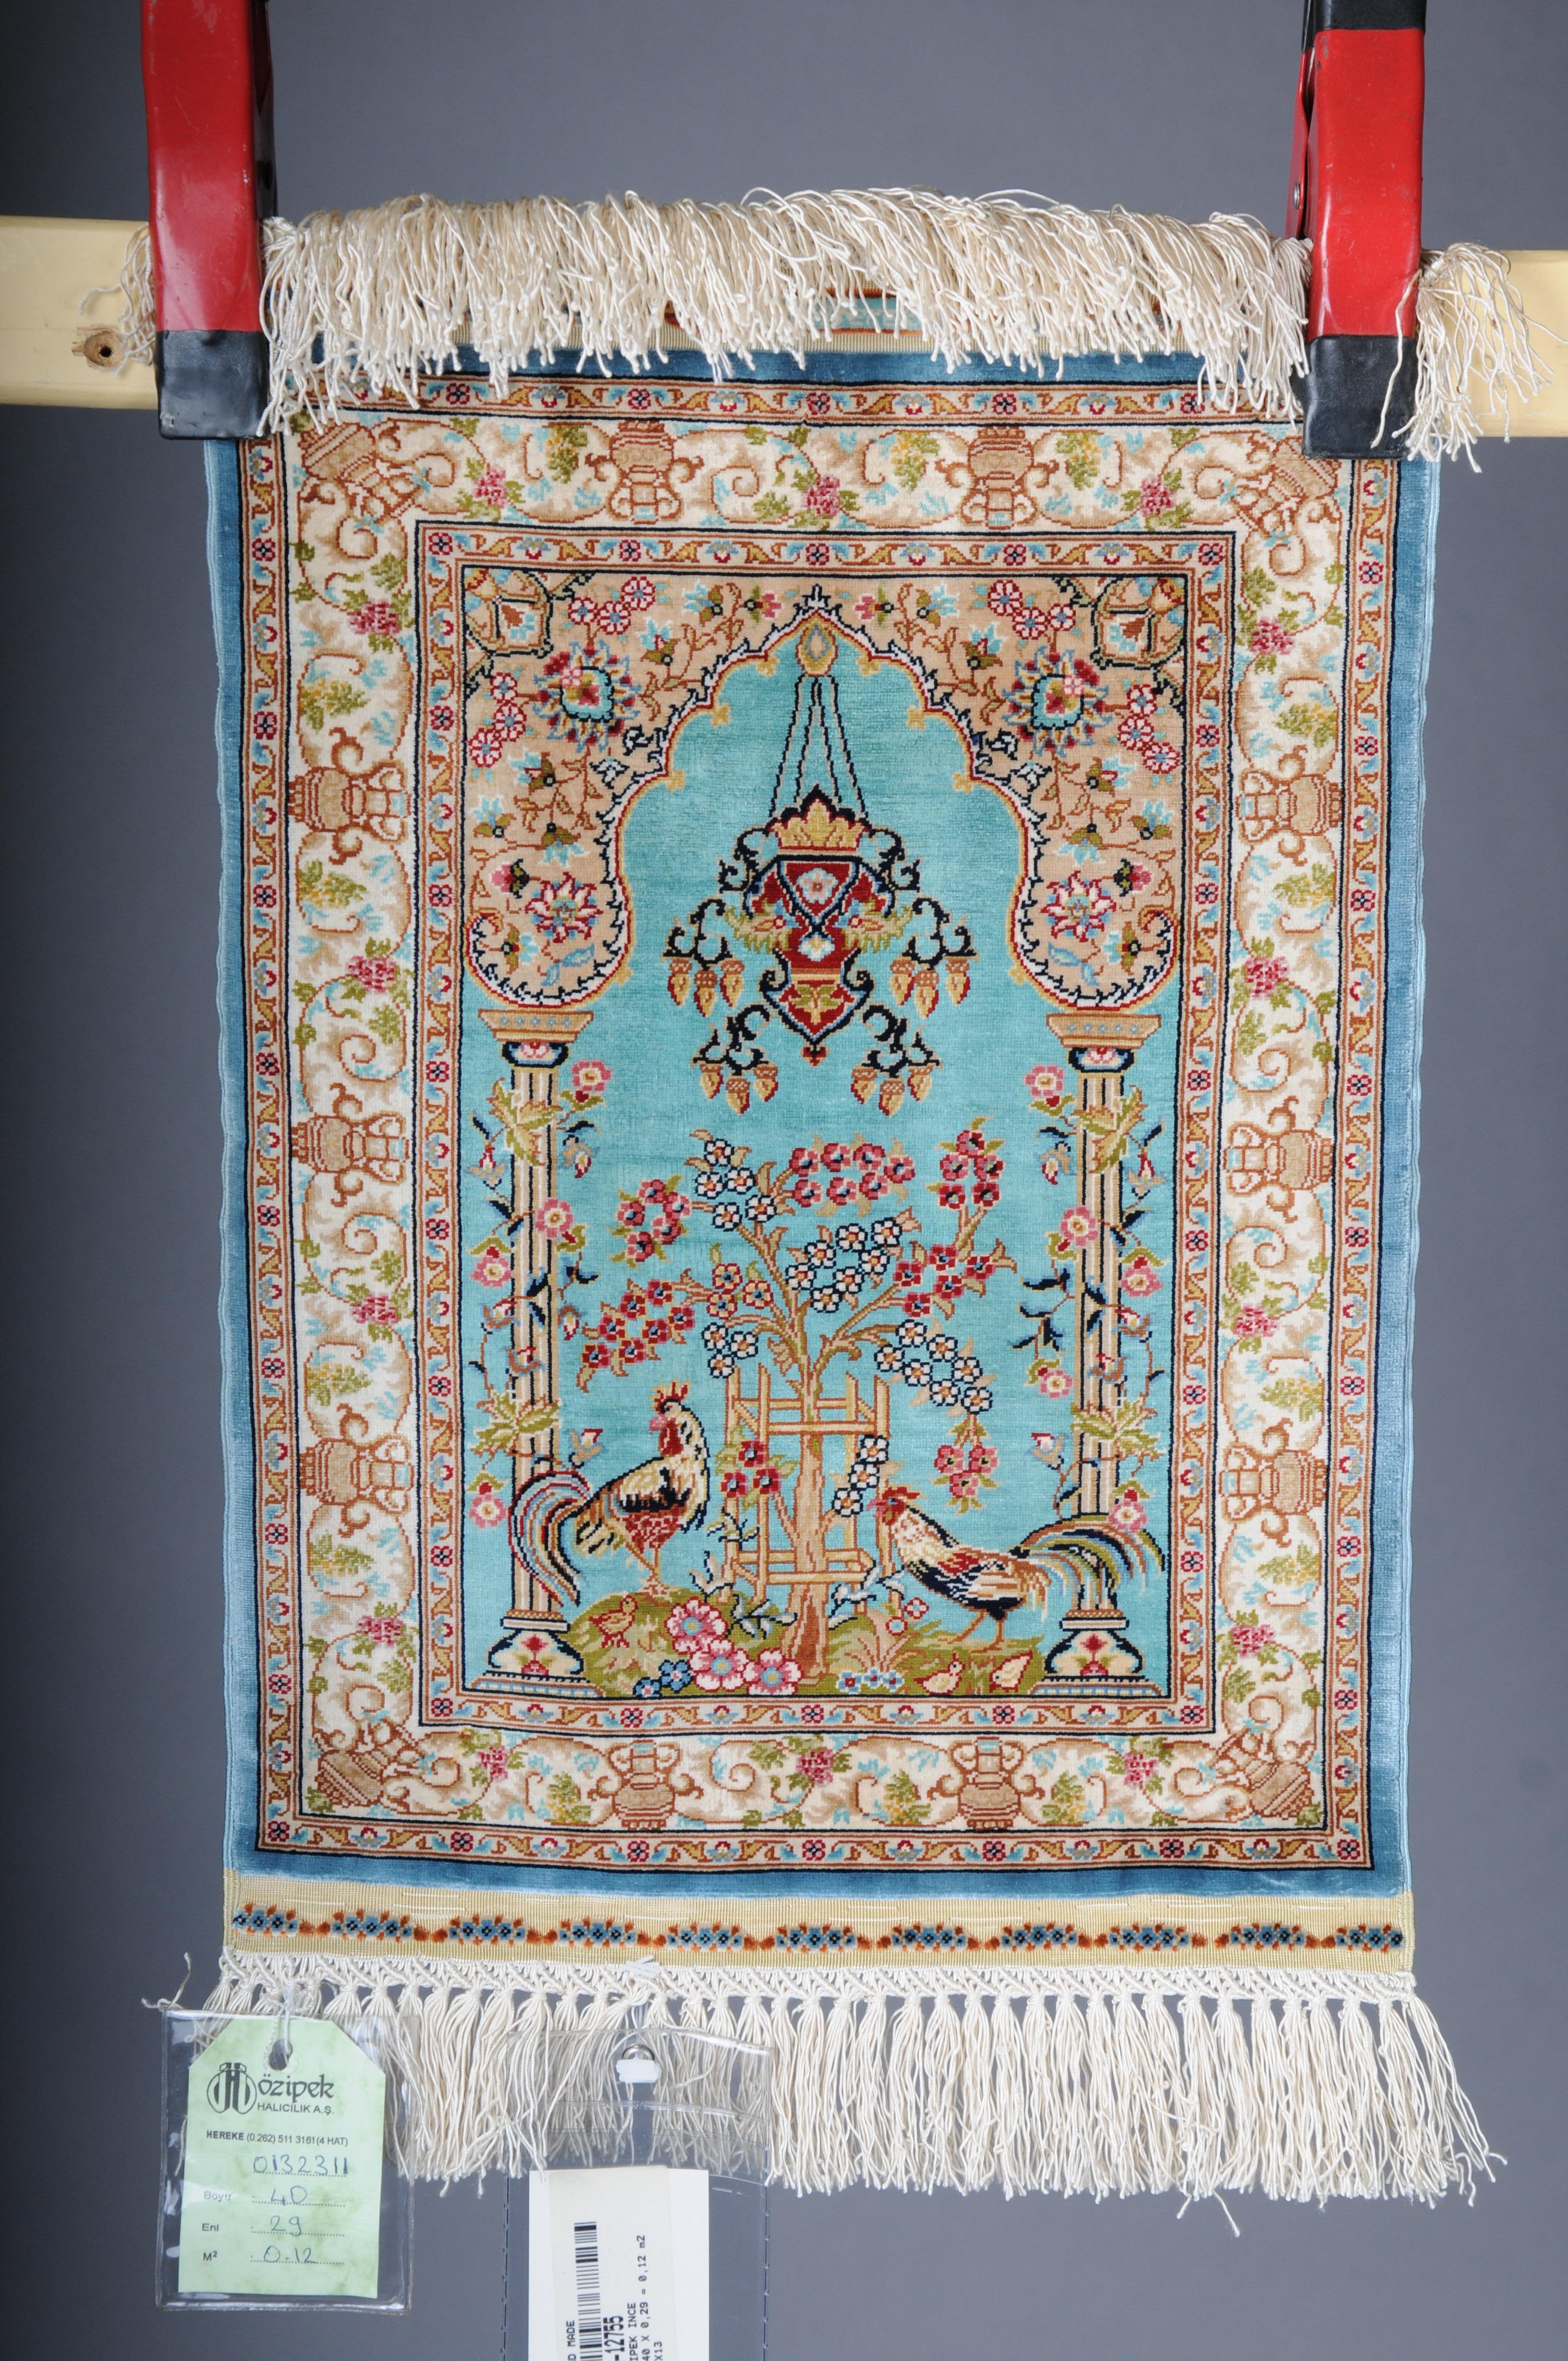 Royal Ozipek silk carpet/tapestry Hereke signed, 20th Century

This hand-knotted Hereke rug is a magnificent addition to your living space. Once intended for imperial palaces, the detailed work of art now decorates your home. Only natural materials